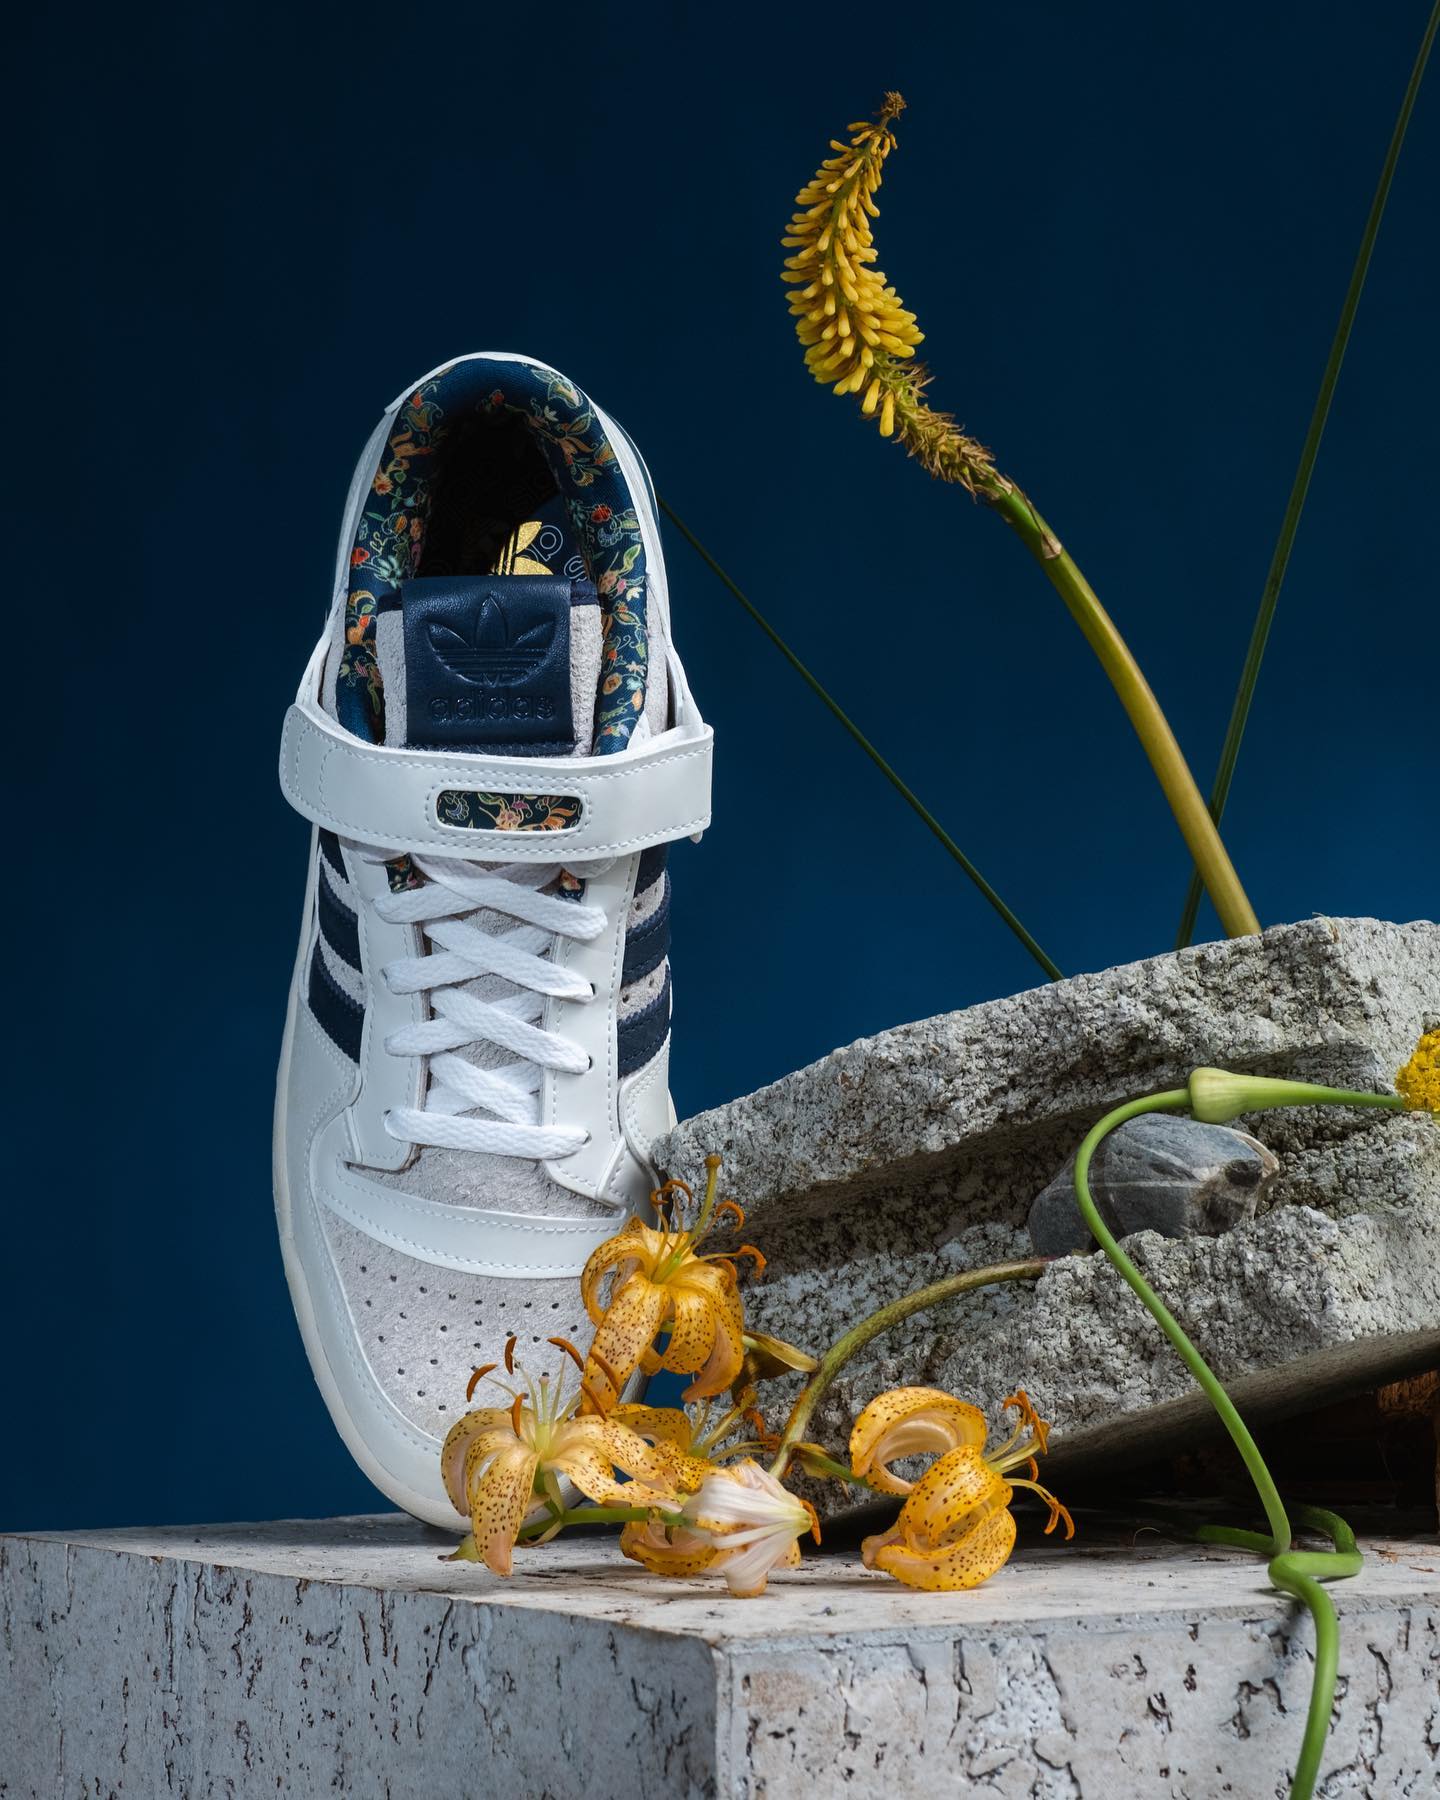 THESE LIMITED EDITION SNEAKERS HAS FLOWER PATTERNS! – Shout